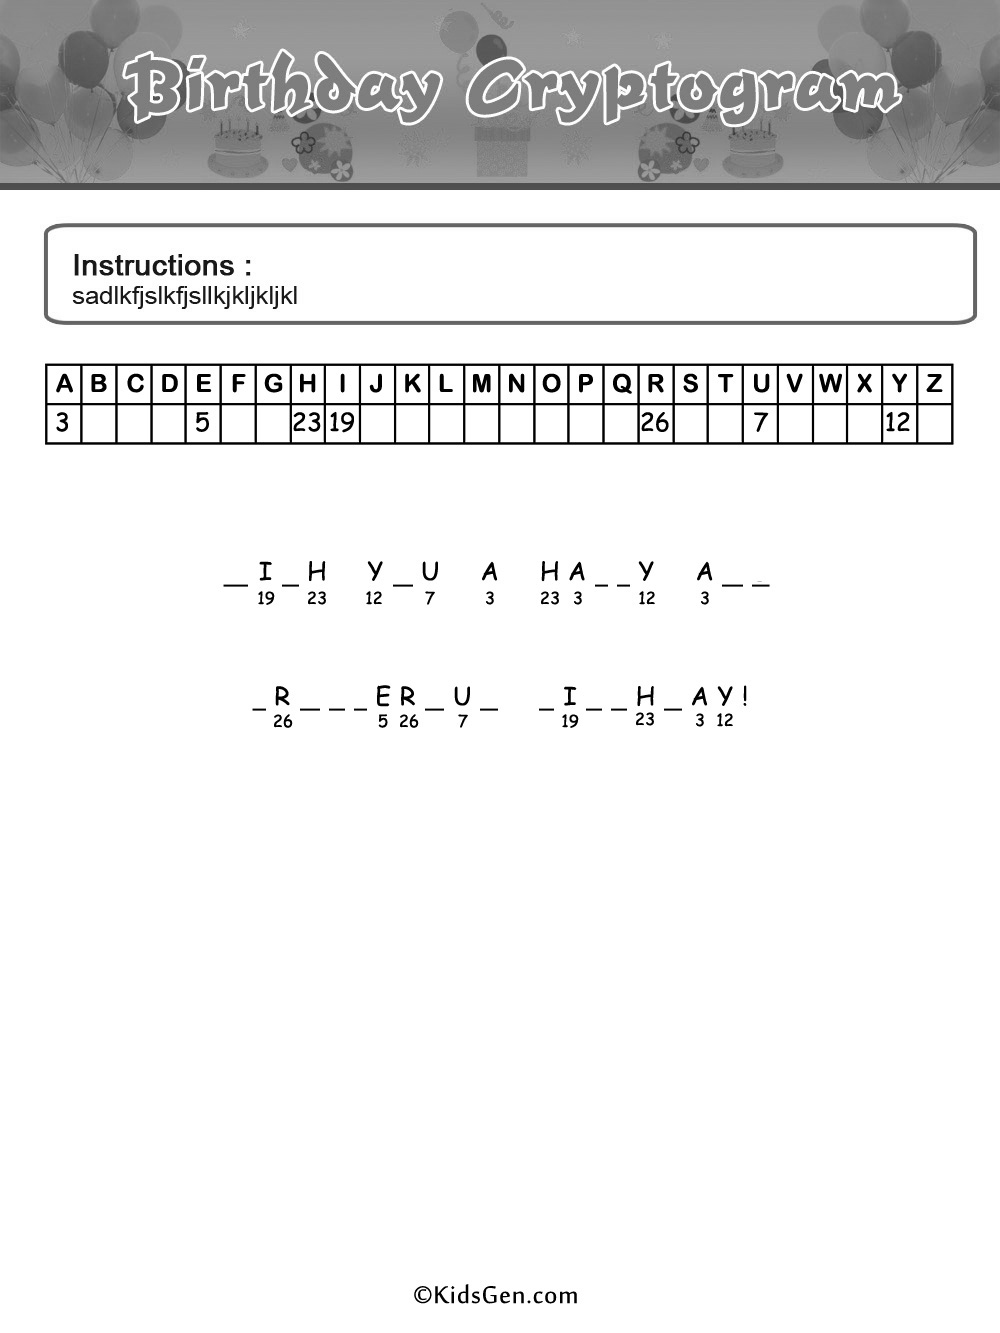 Black and White Cryptogram Puzzle